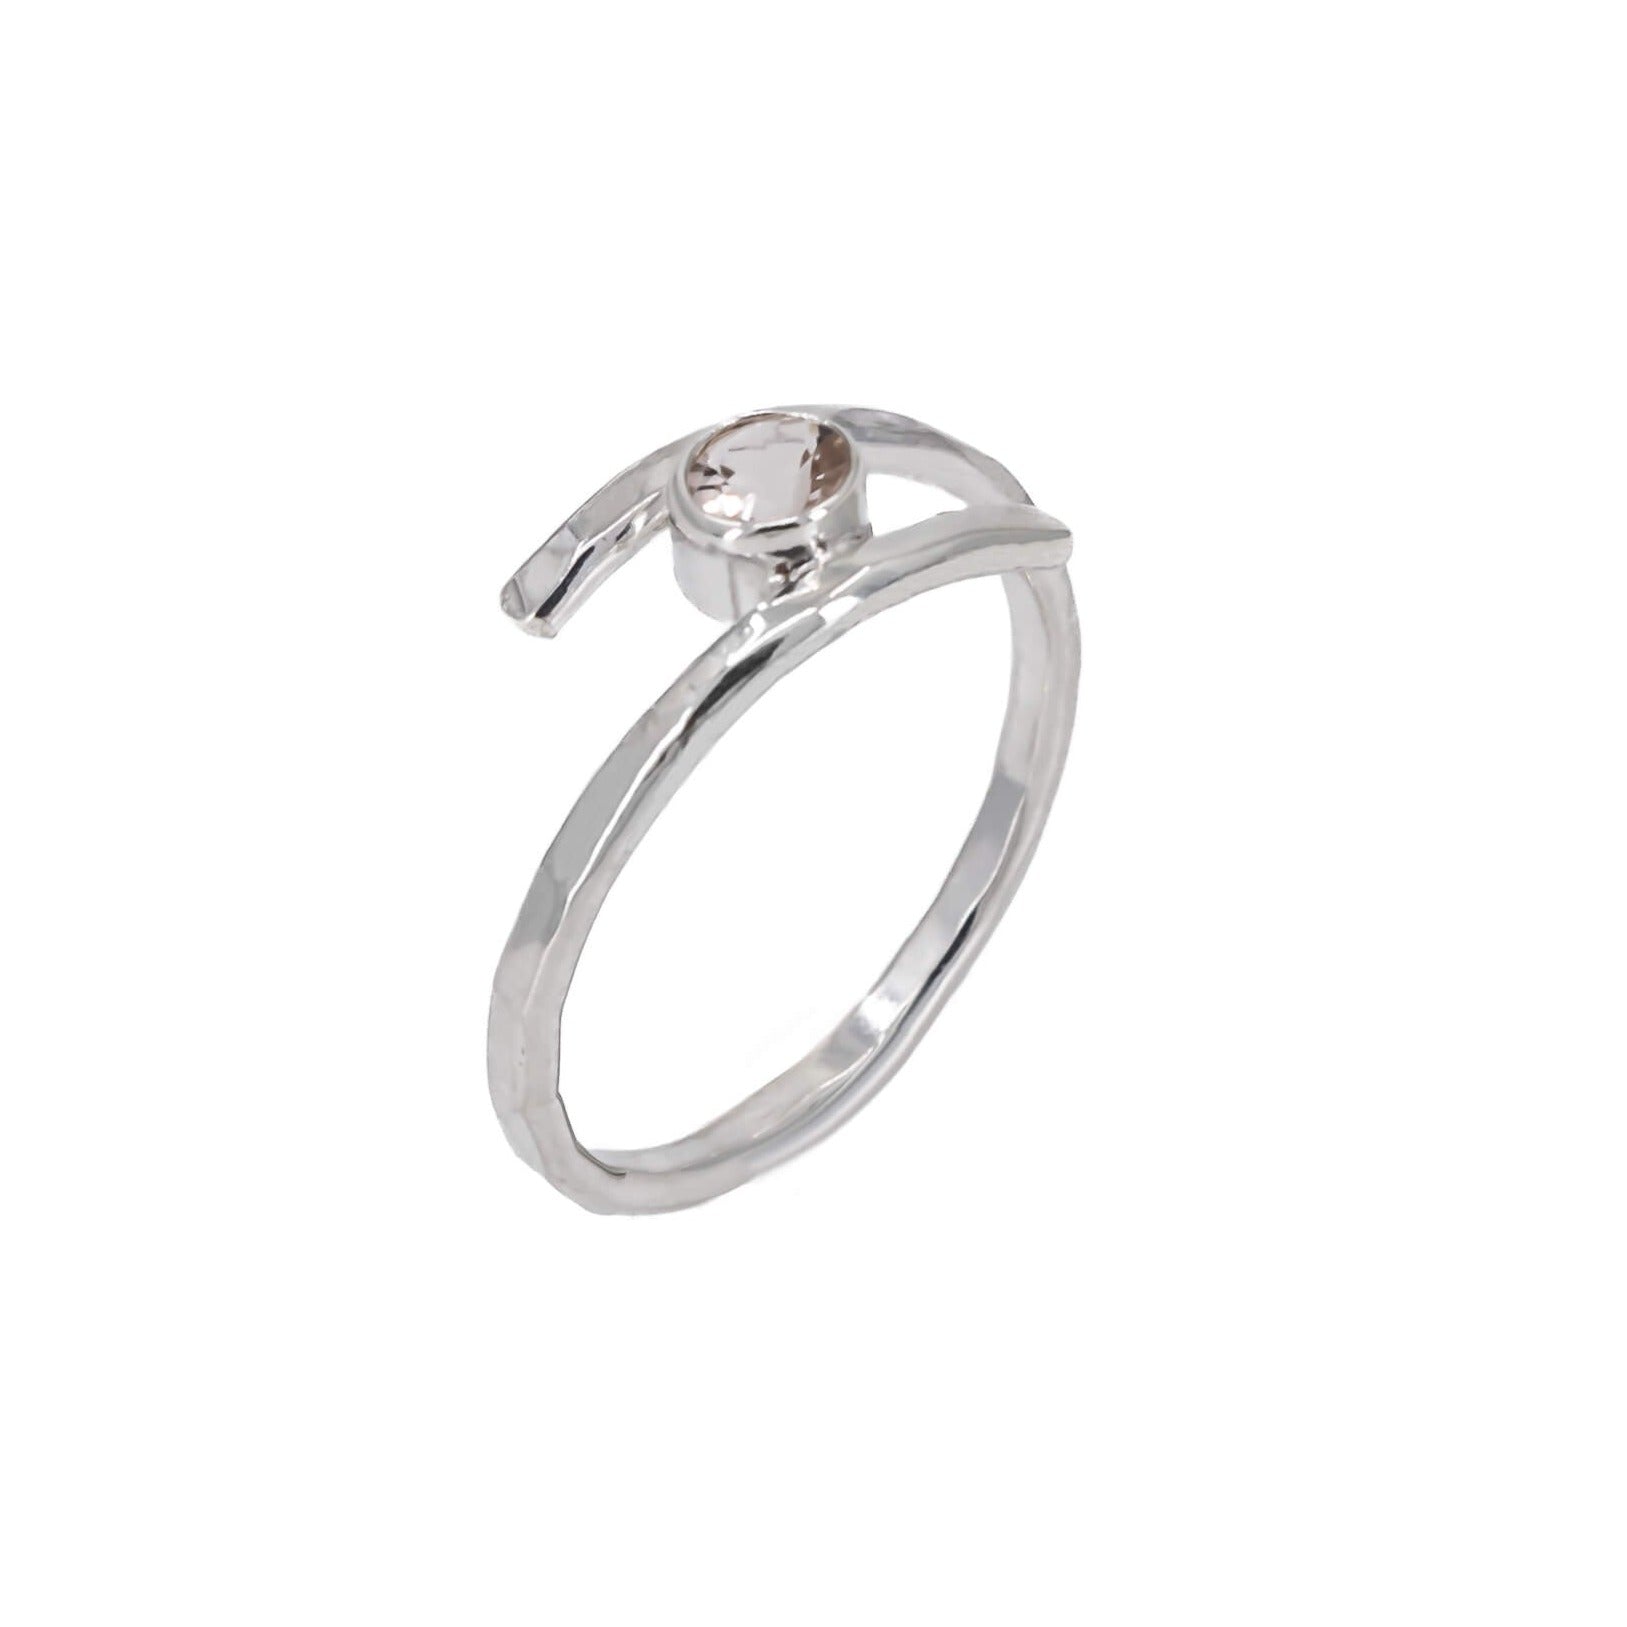 The Hugged Sterling Silver Ring